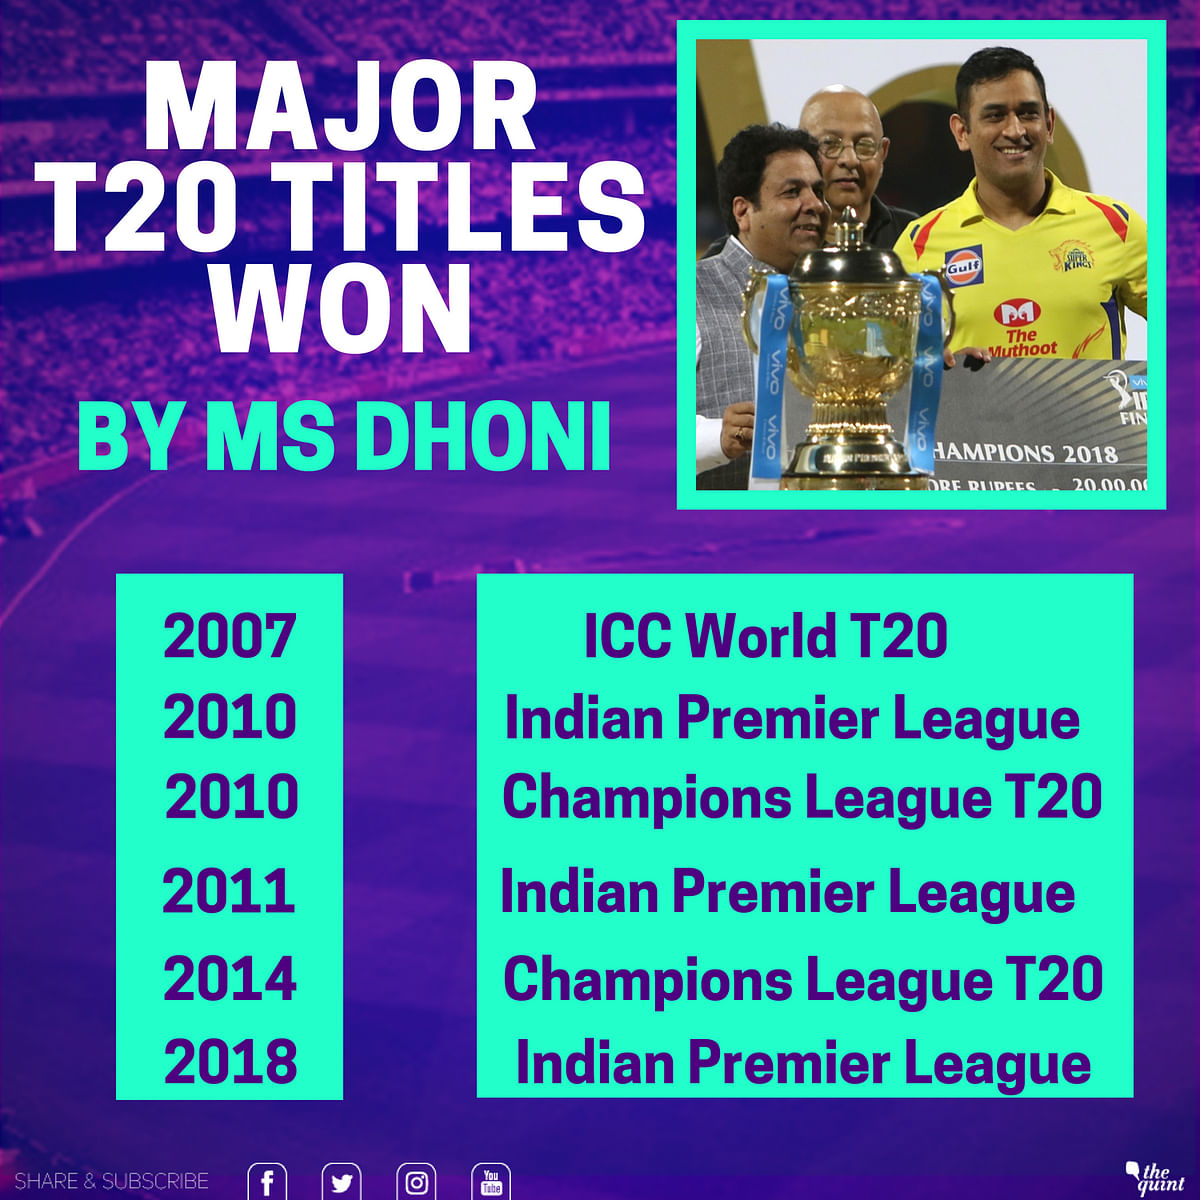 MS Dhoni led Chennai Super Kings to their third Indian Premier League title on 27 May.